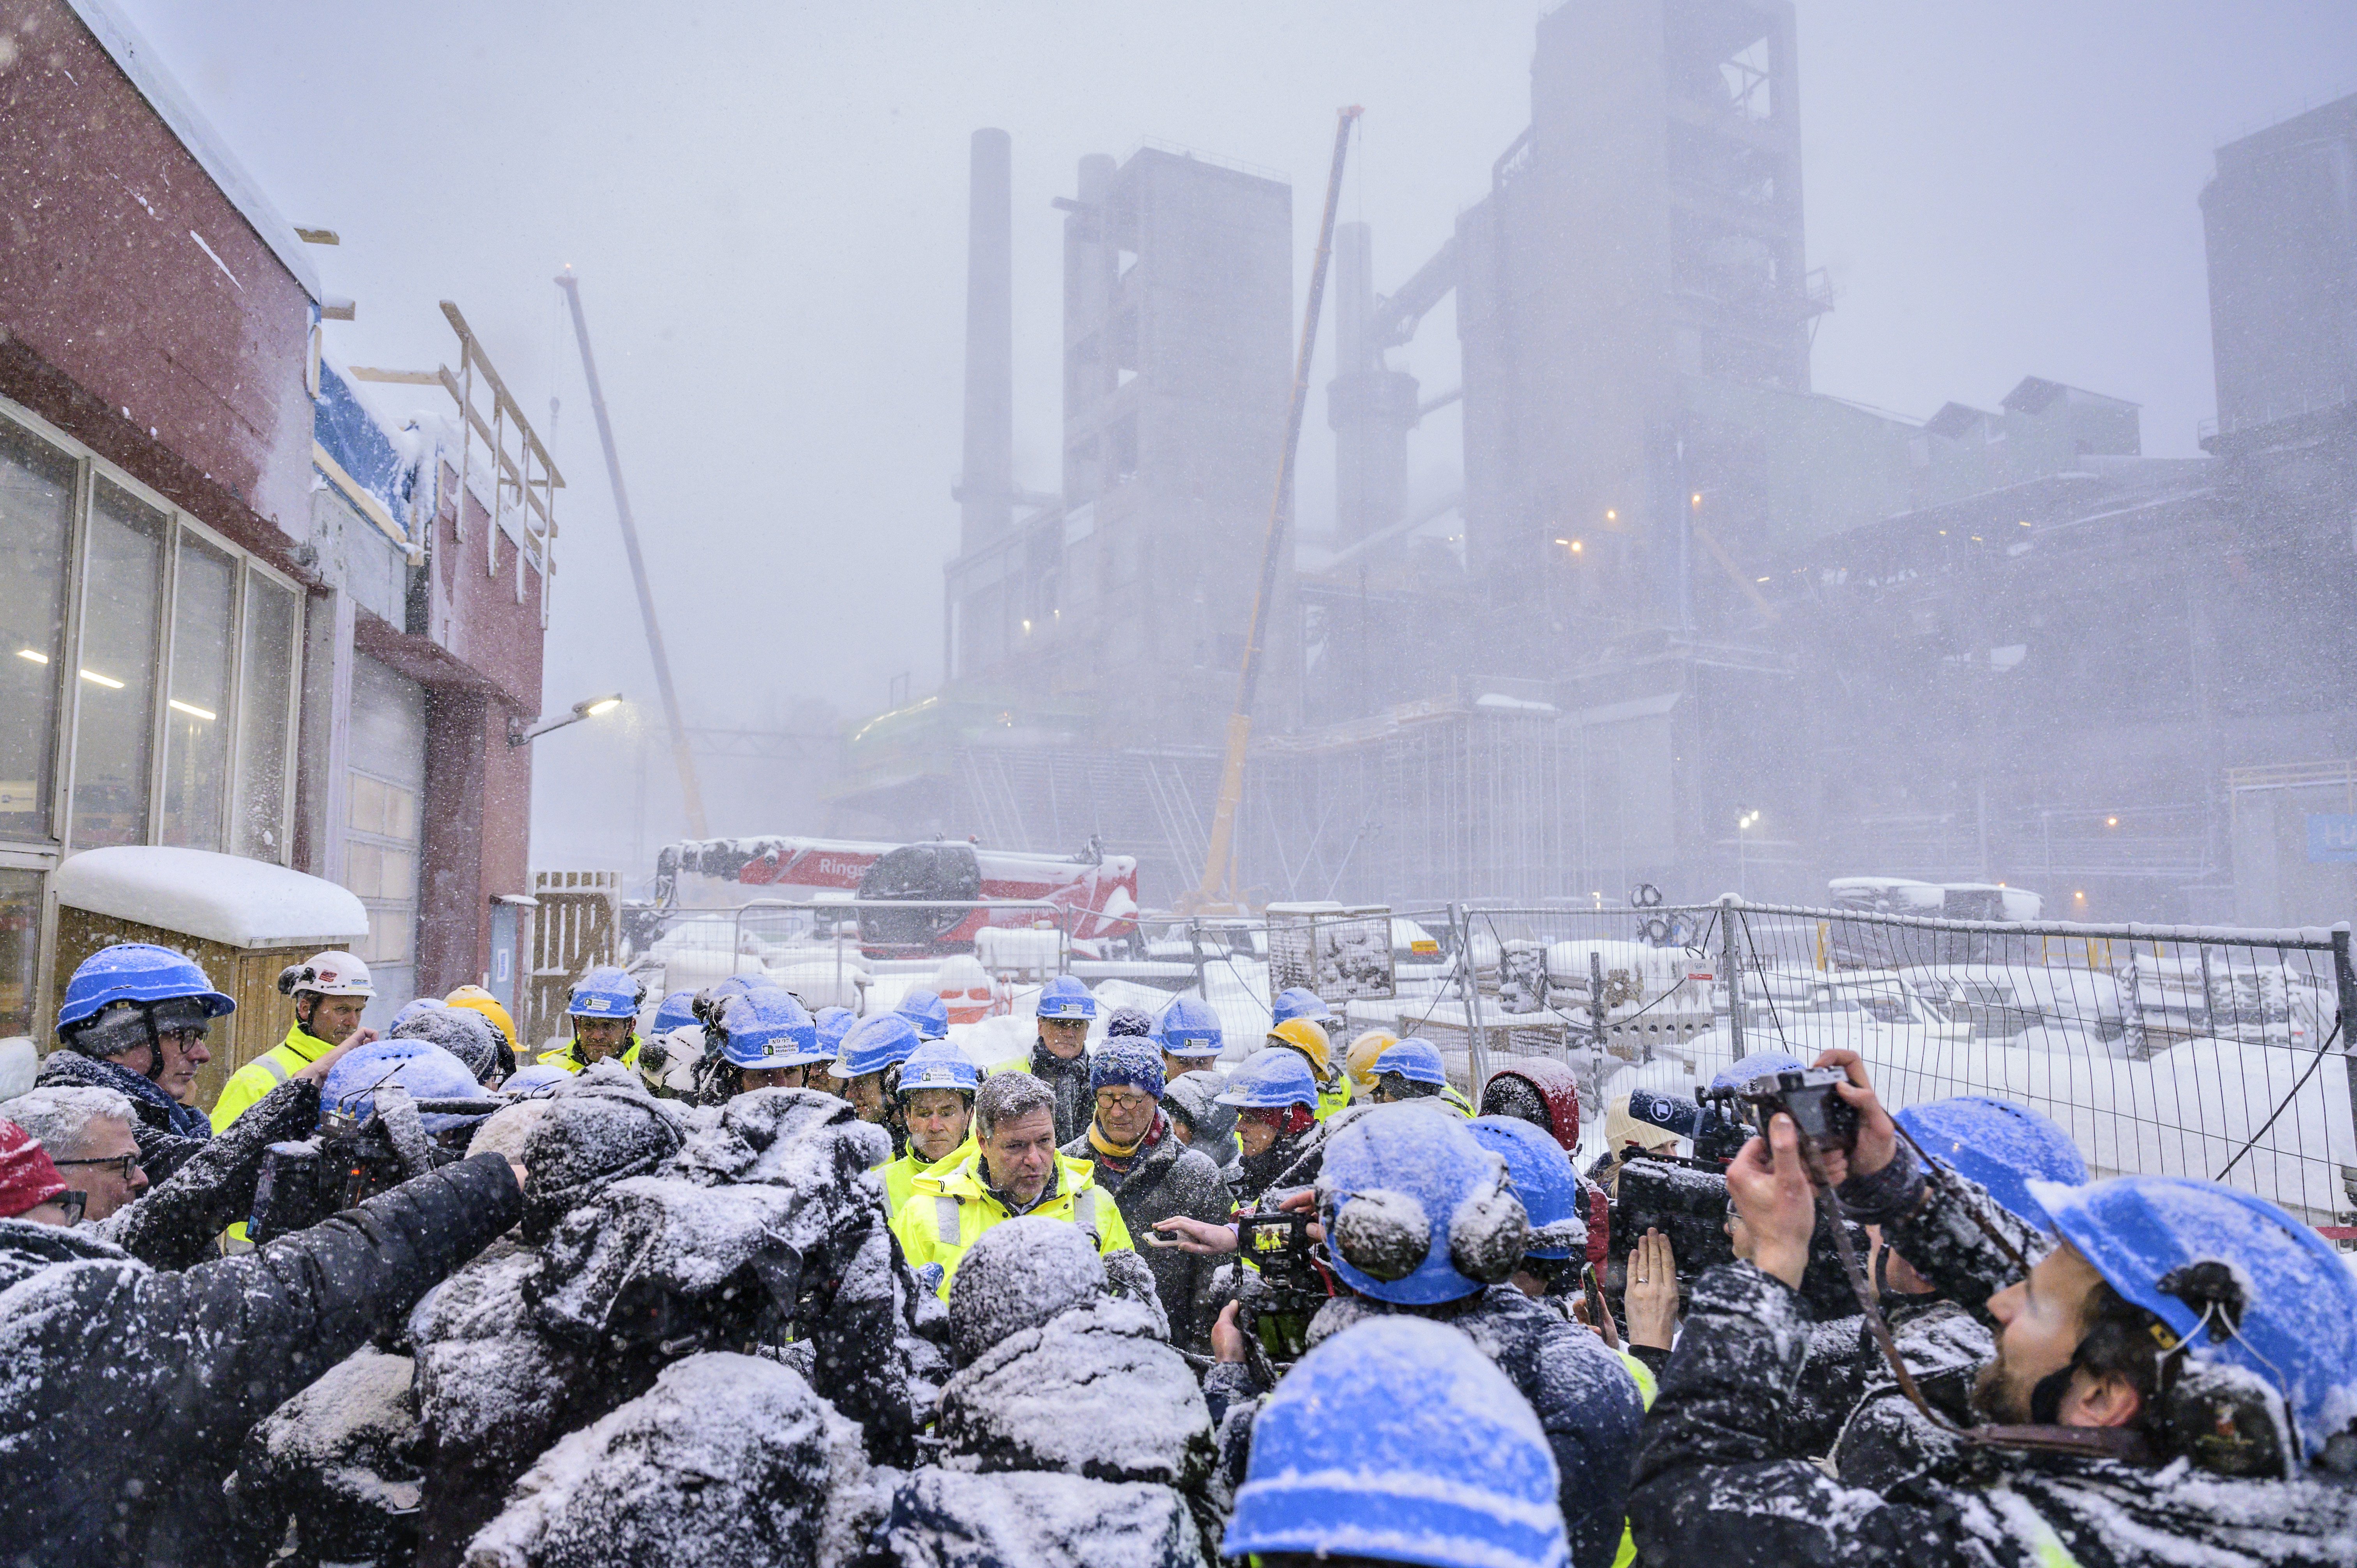 Man being interviewed and photographed on a snowy industrial site